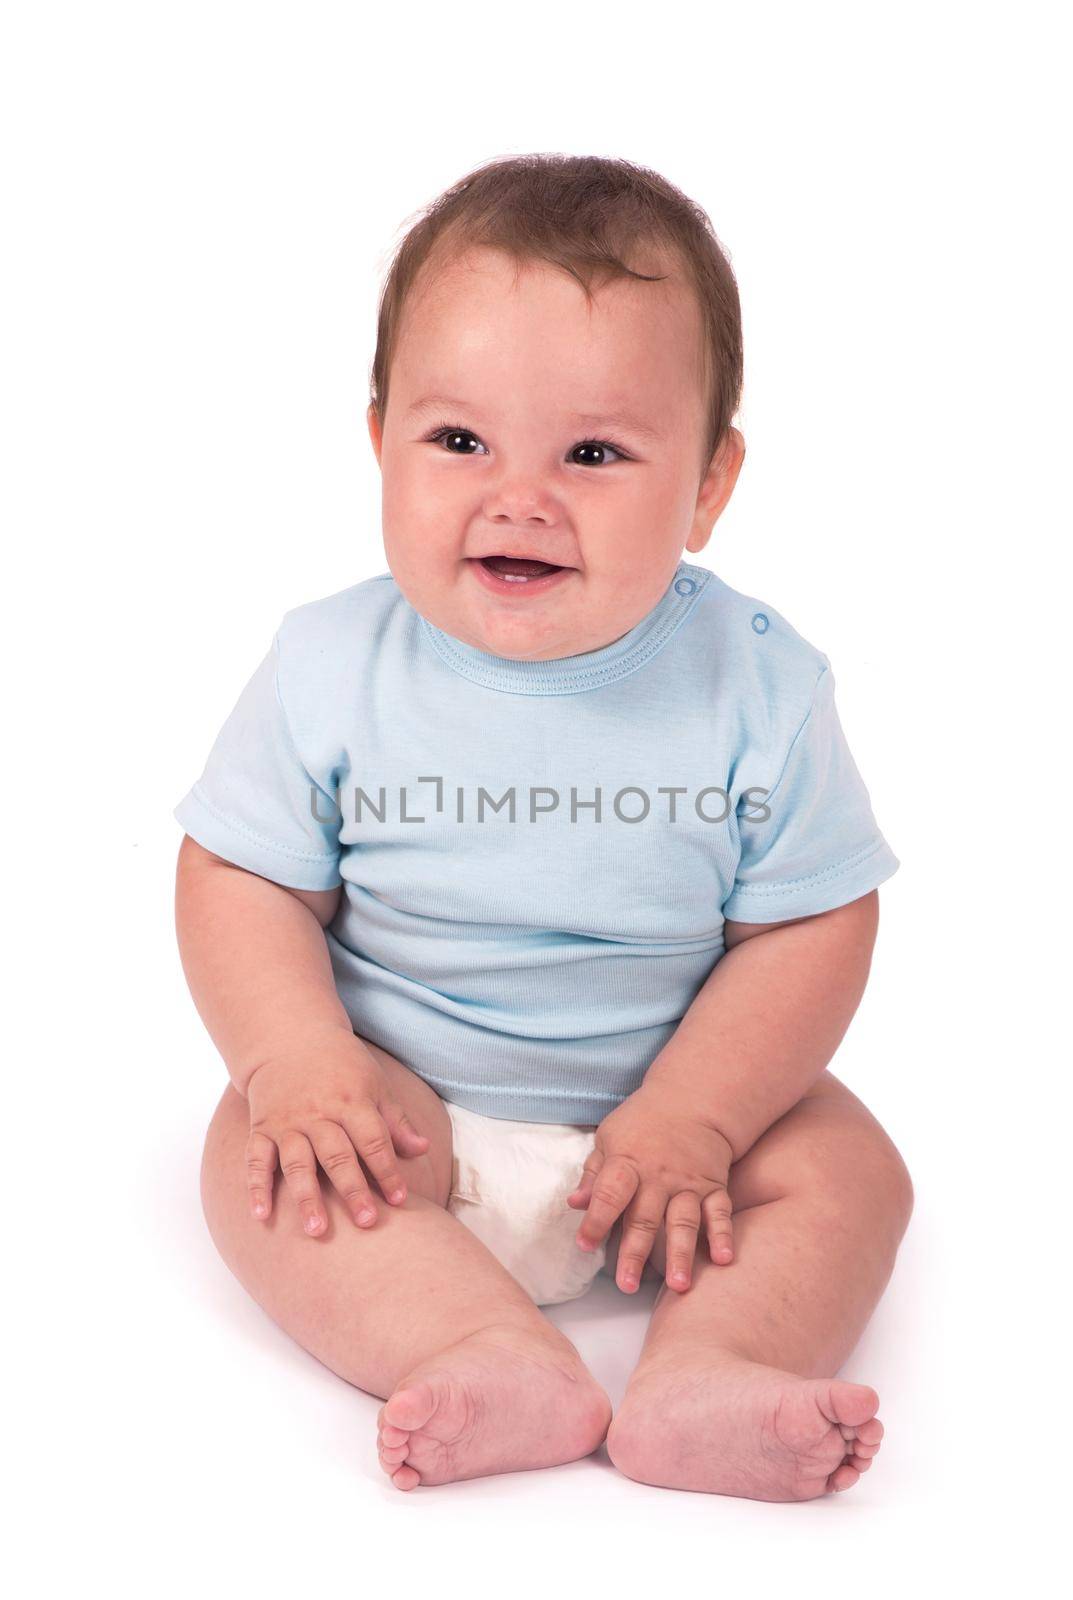 Little baby boy lying on the bed on white background by aprilphoto